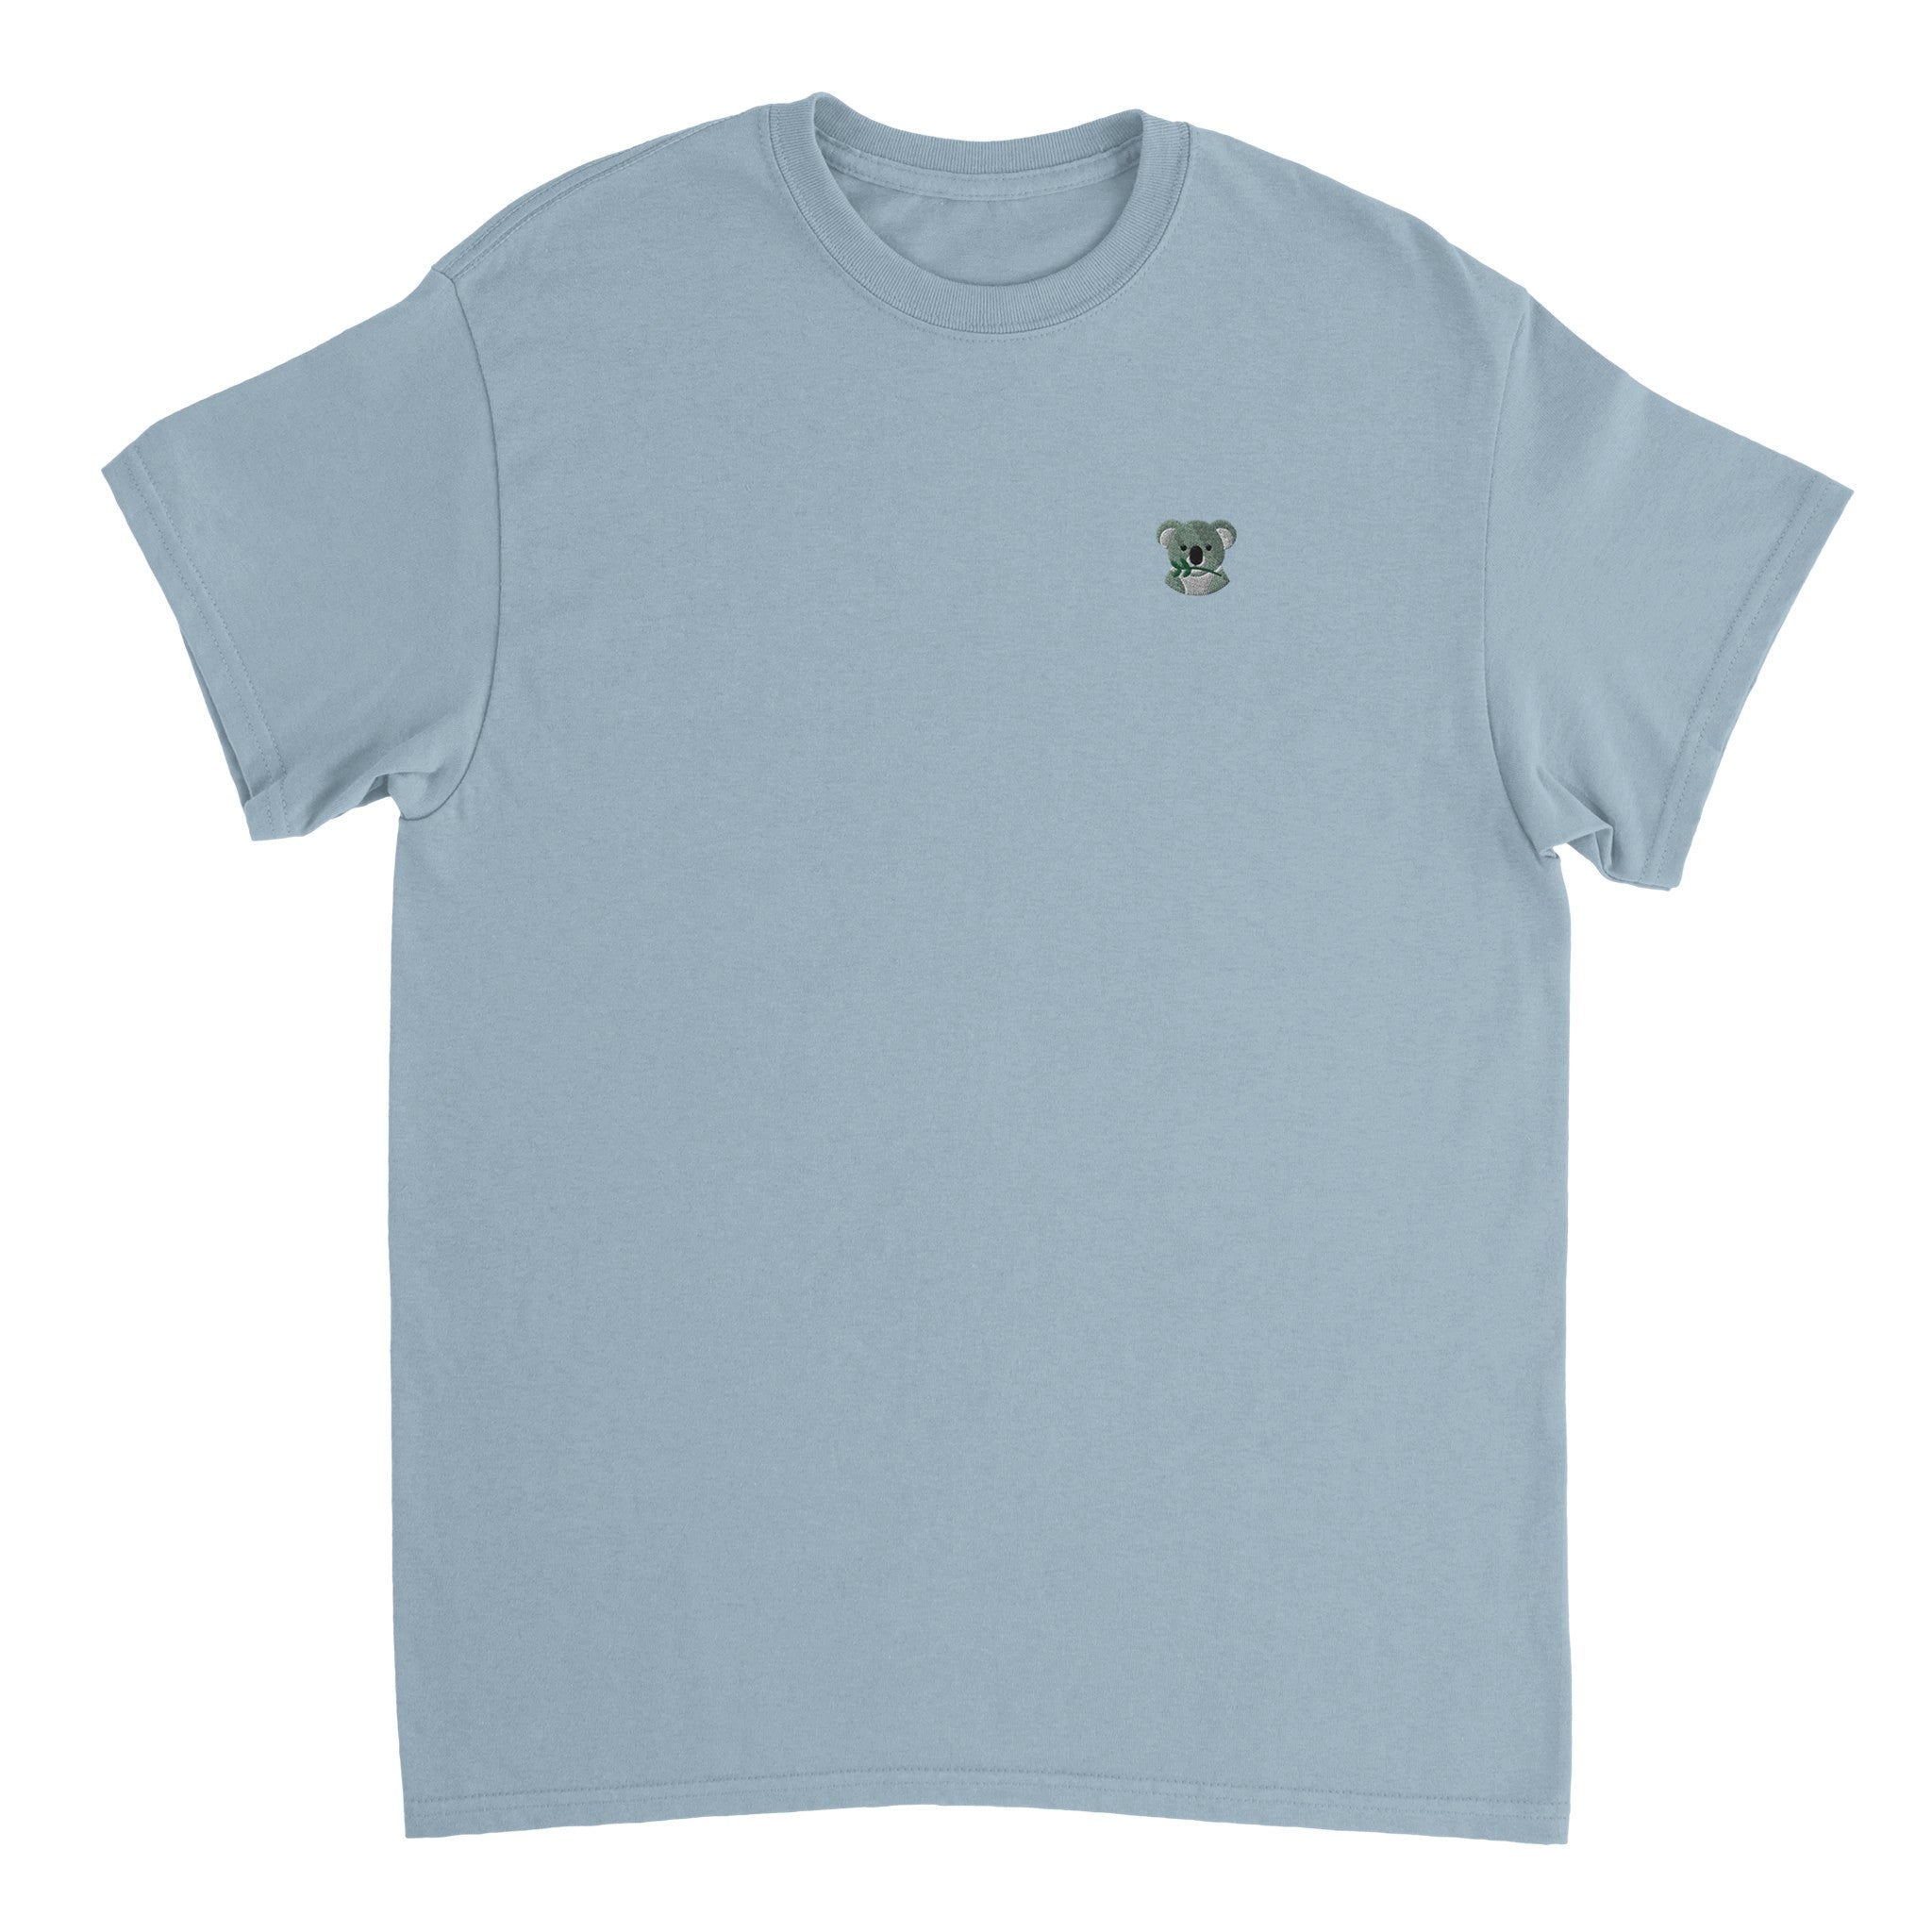 Koala Embroidery T-Shirt - Heavyweight Unisex Patchicon Essential